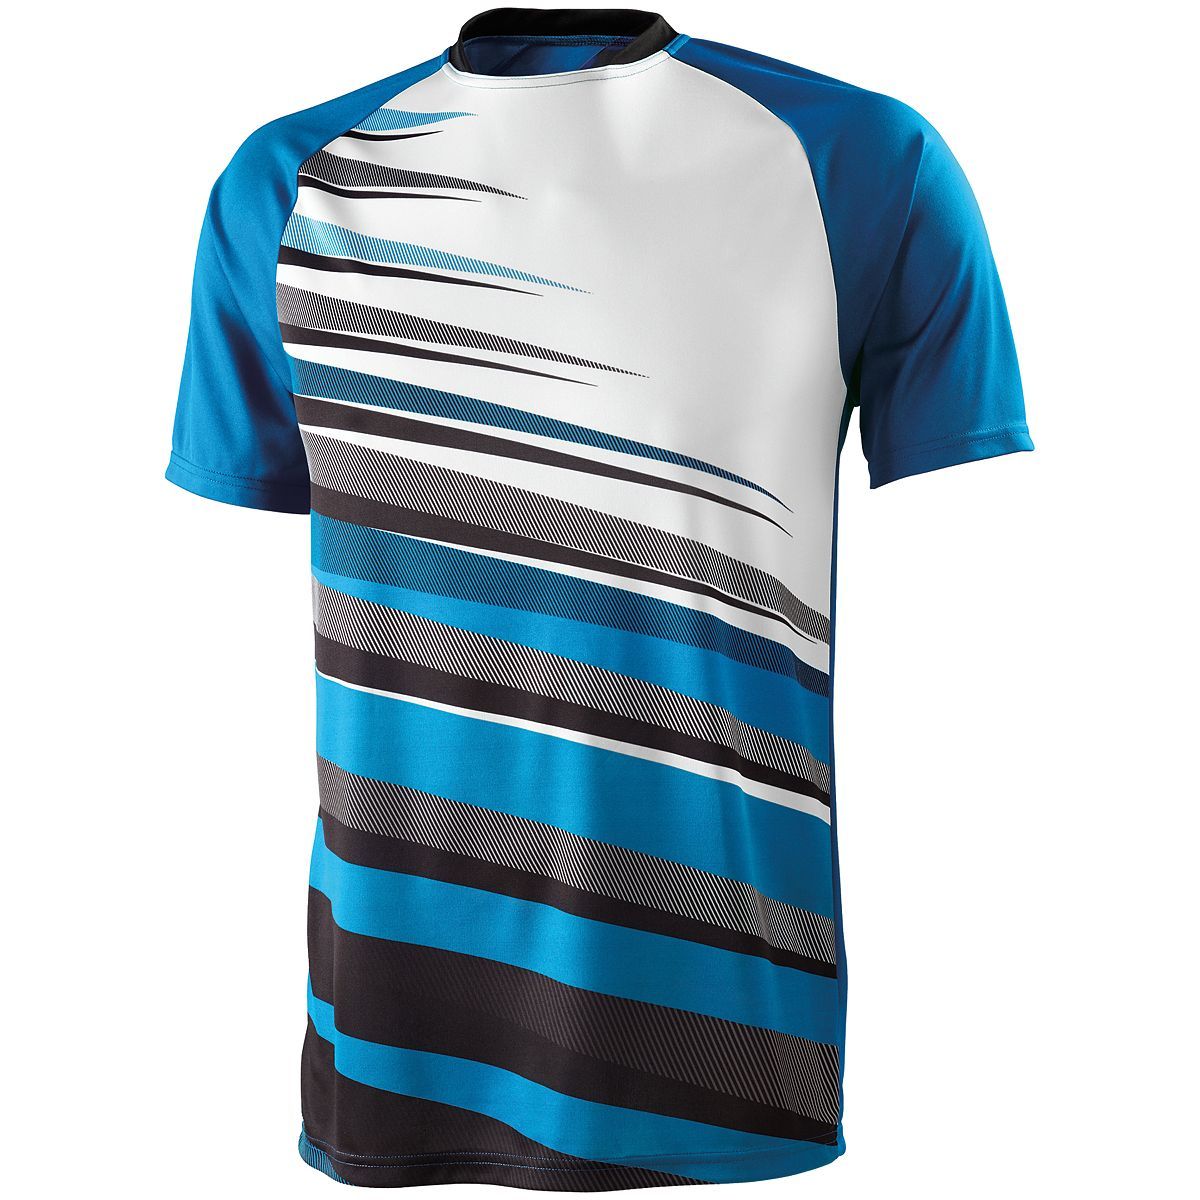 High 5 Youth Galactic Jersey in Power Blue/Black/White  -Part of the Youth, Youth-Jersey, High5-Products, Soccer, Shirts, All-Sports-1 product lines at KanaleyCreations.com